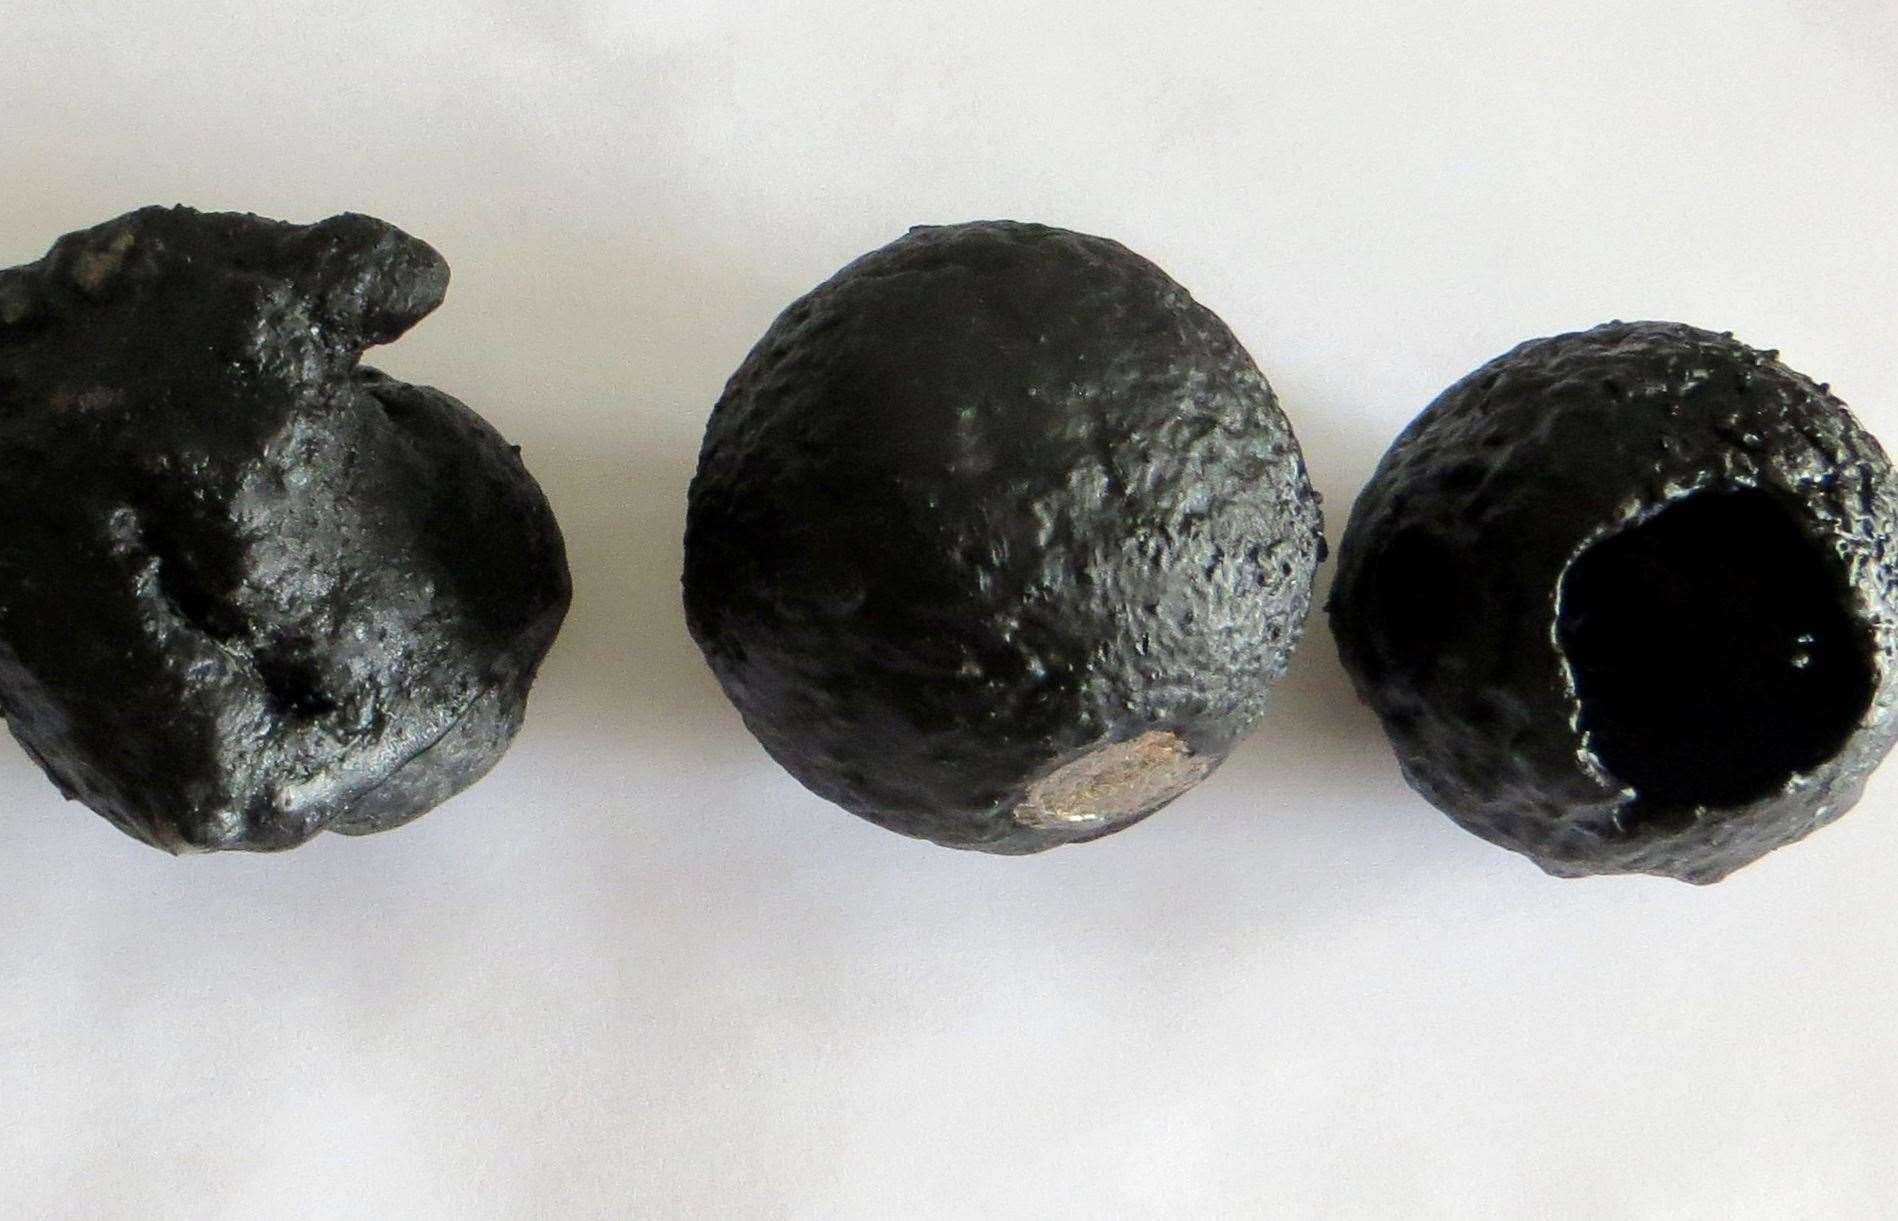 An enlarged 3D printed version of the micrometeorites - the severity of the melting they undergo while entering the atmosphere makes them more spherical - as seen on the right. Picture: Matthias van Ginneken